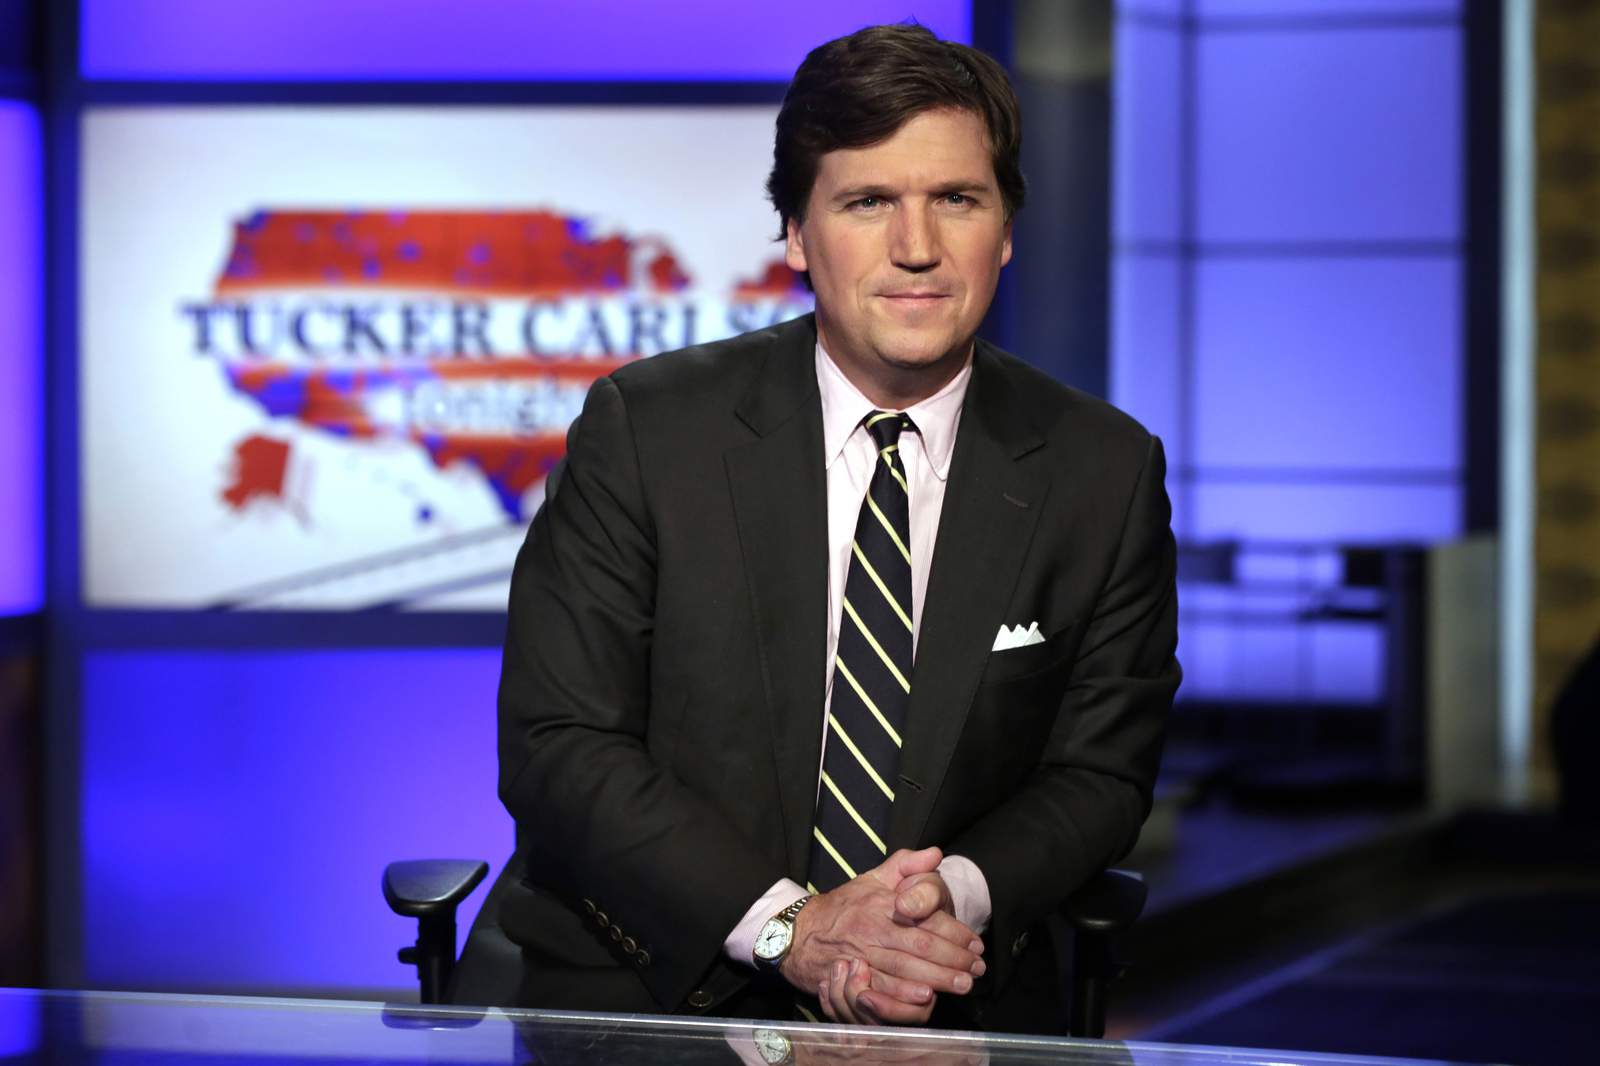 Timing of Carlson's vacation familiar to Fox News viewers